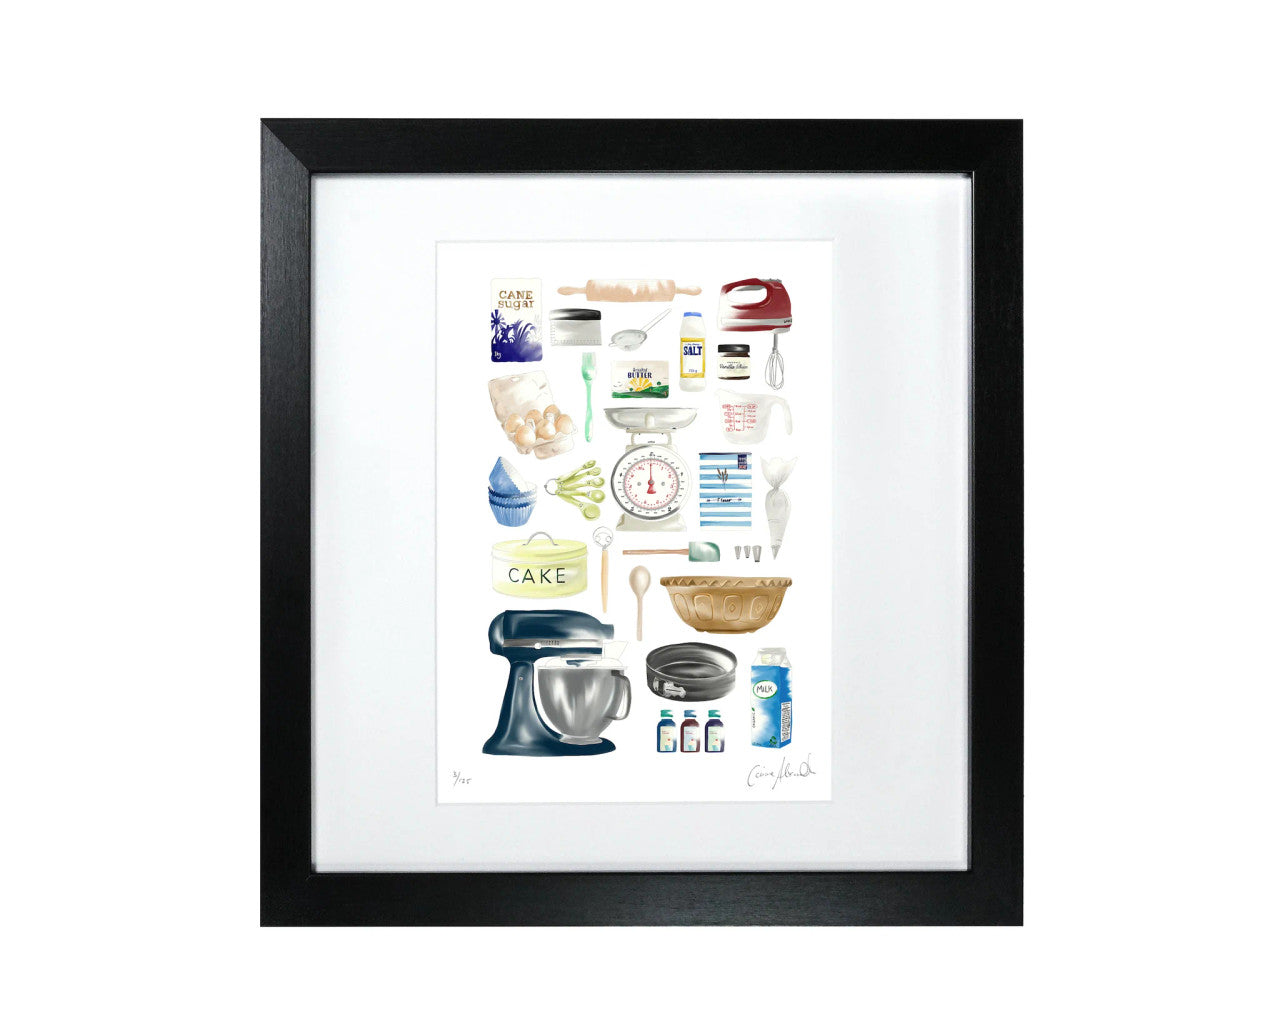 Time to Bake Framed Print by Corinne Alexander. Made in England.